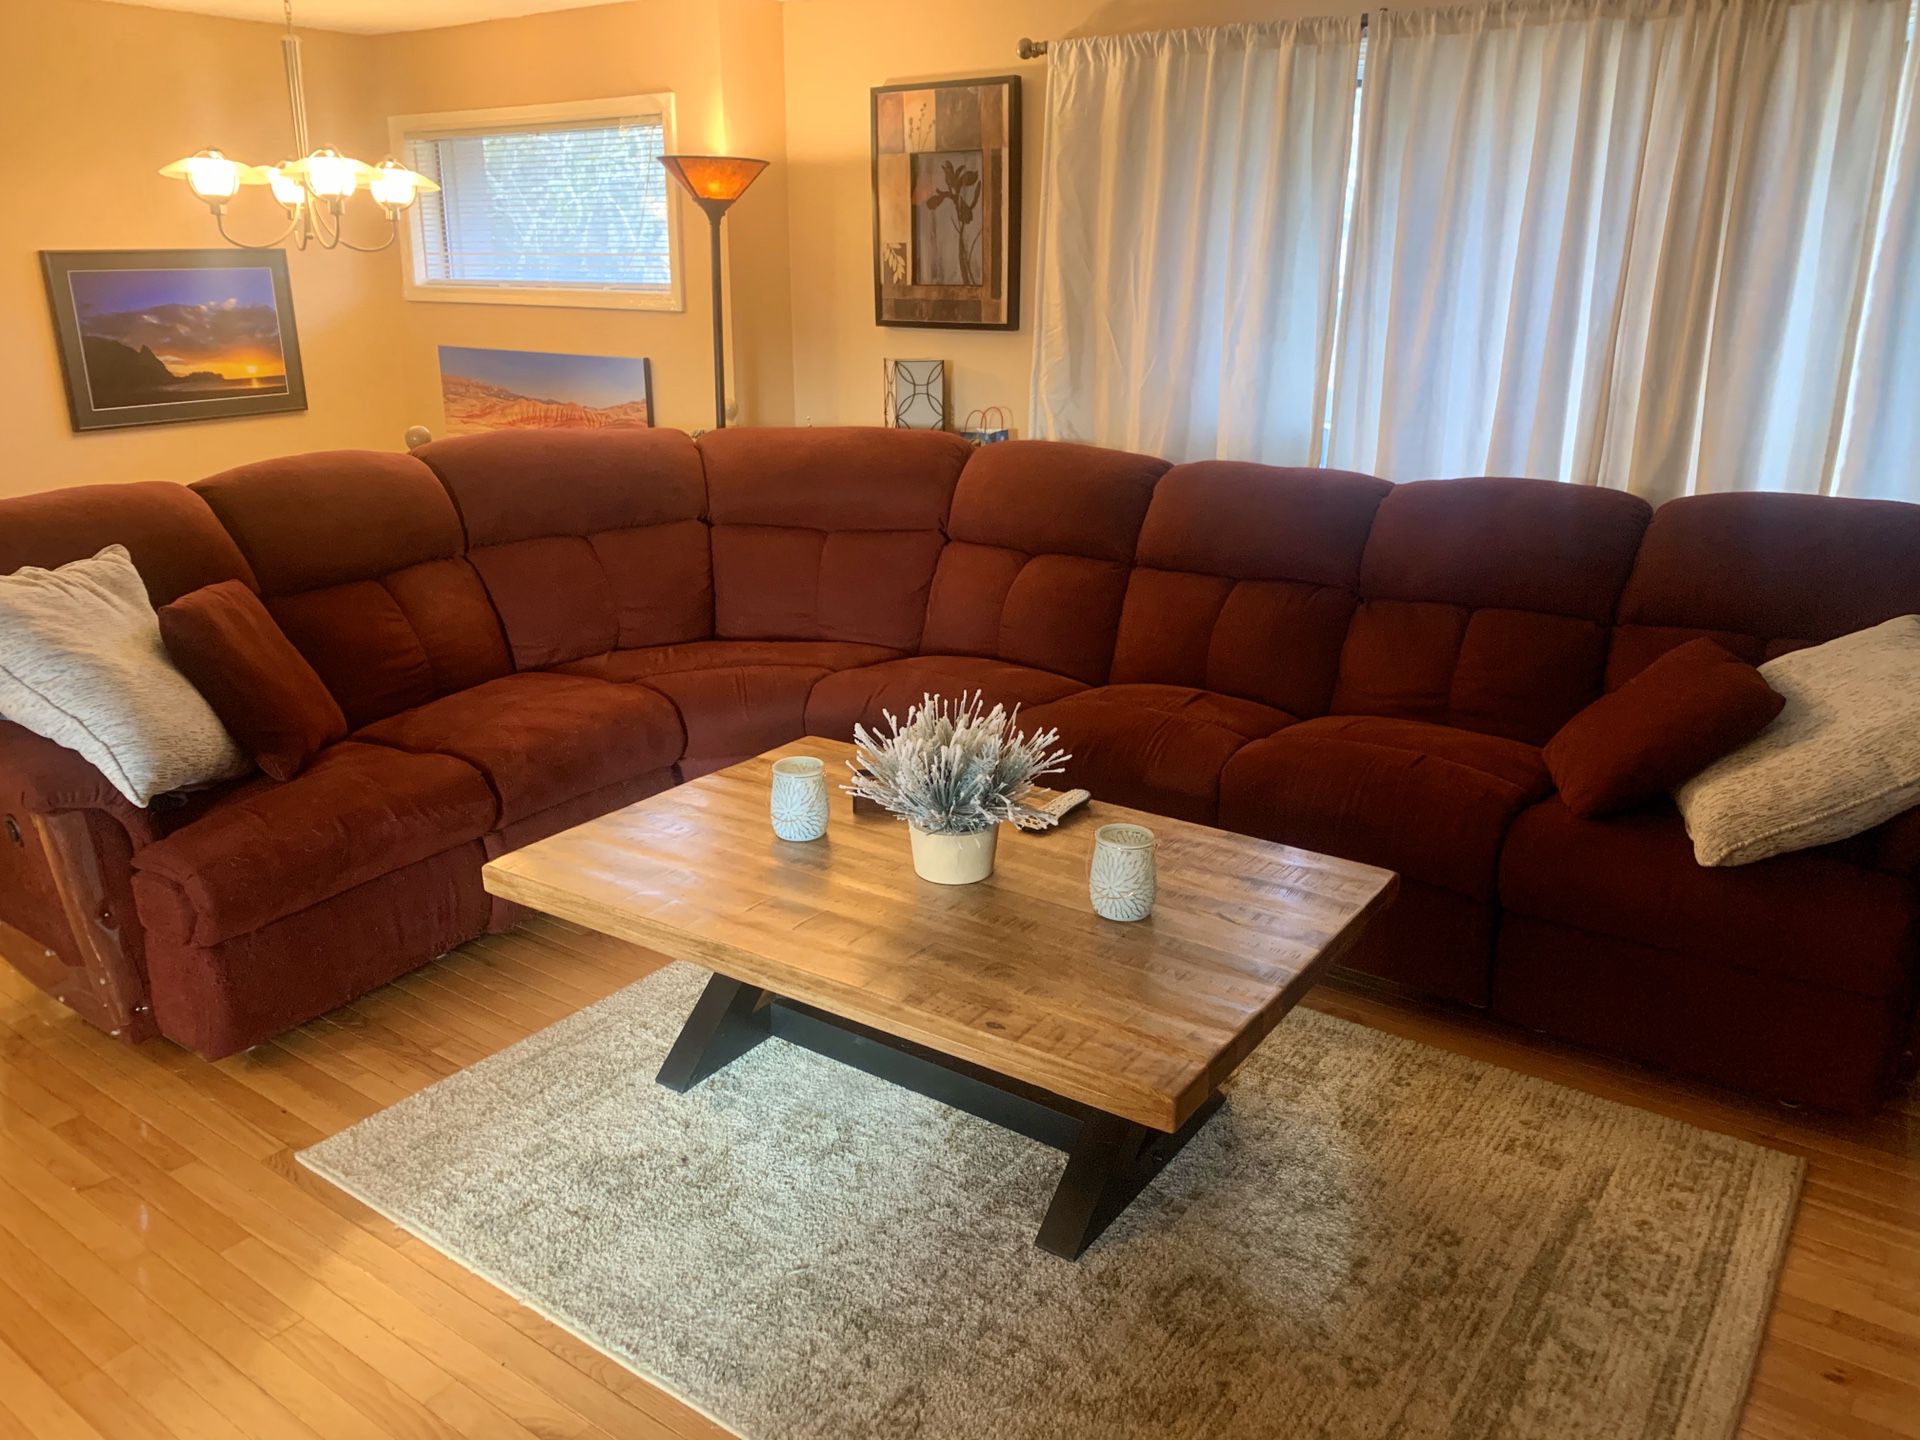 FREE 7 piece sectional with motorized recliners